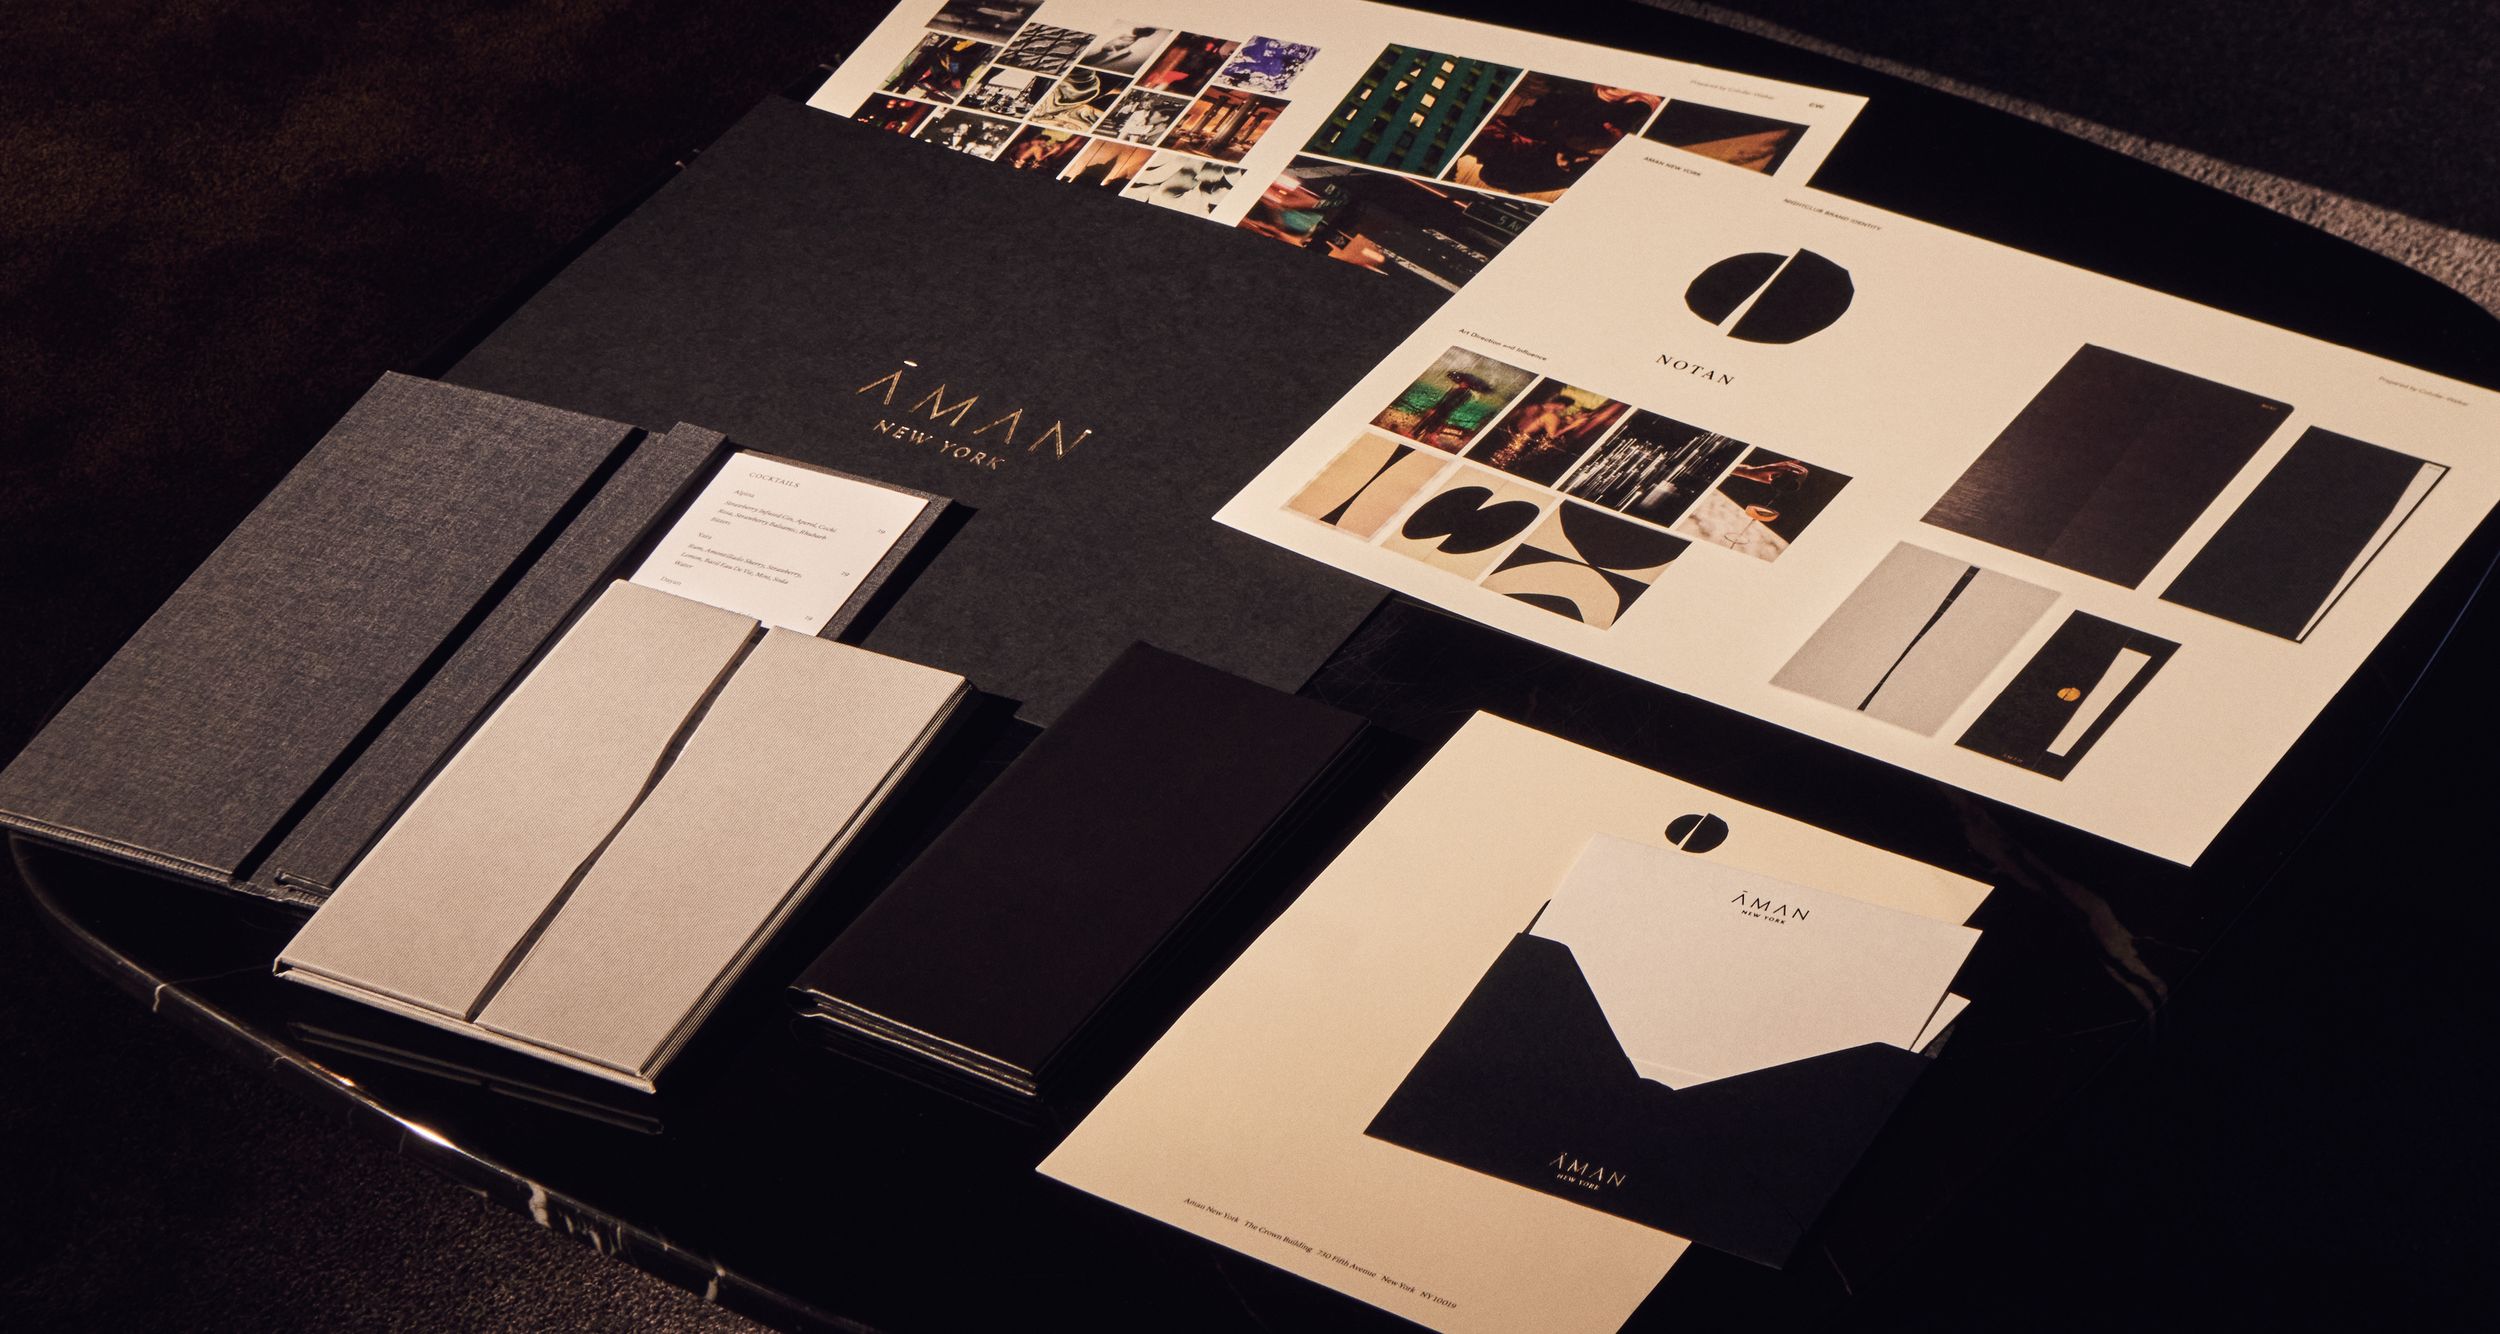 An overview of creative direction, brand identity and menu designs for The Jazz Club, Aman New York.